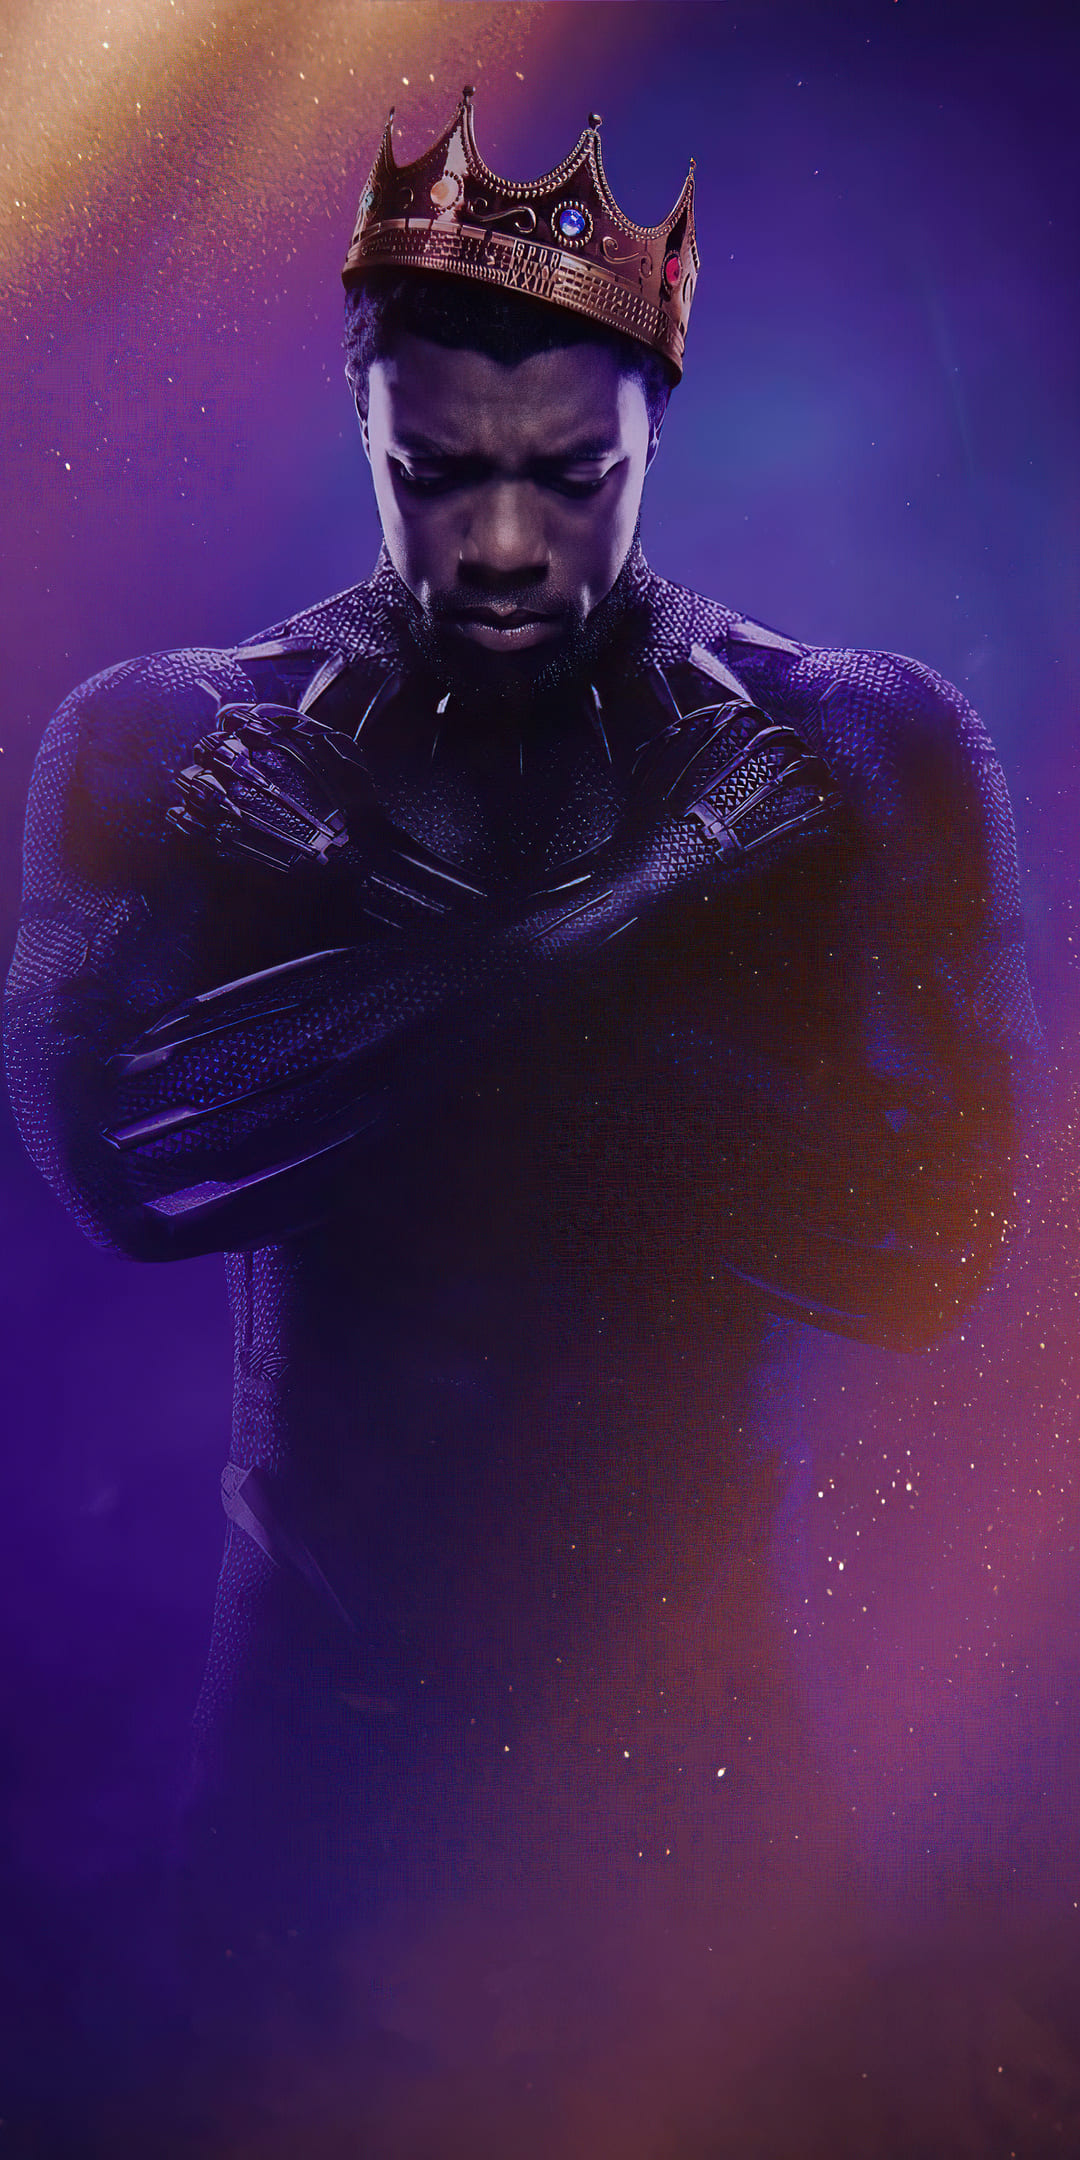 Black Panther Wallpapers - Top 65 Best Black Panther Backgrounds Download